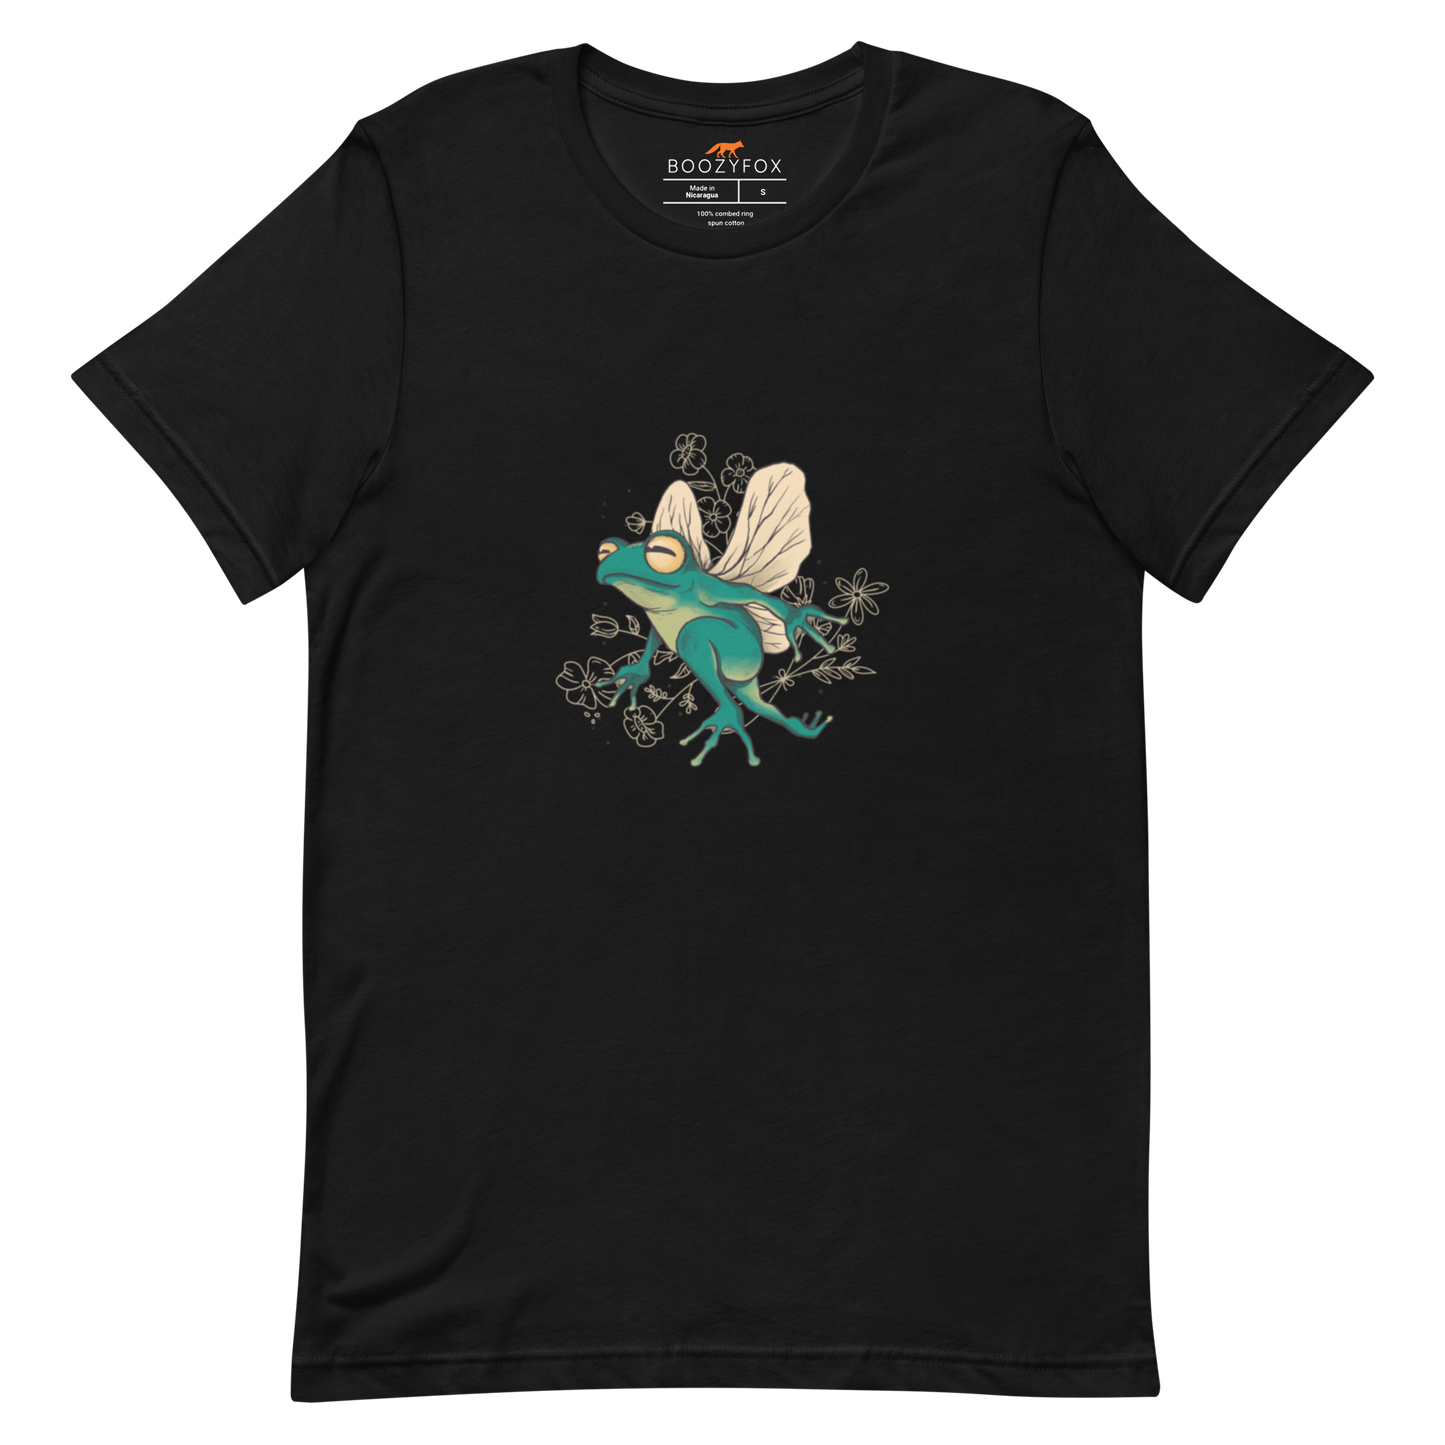 Black Premium Frog T-Shirt featuring an adorable Fairy Frog graphic on the chest - Funny Graphic Frog Tees - Boozy Fox